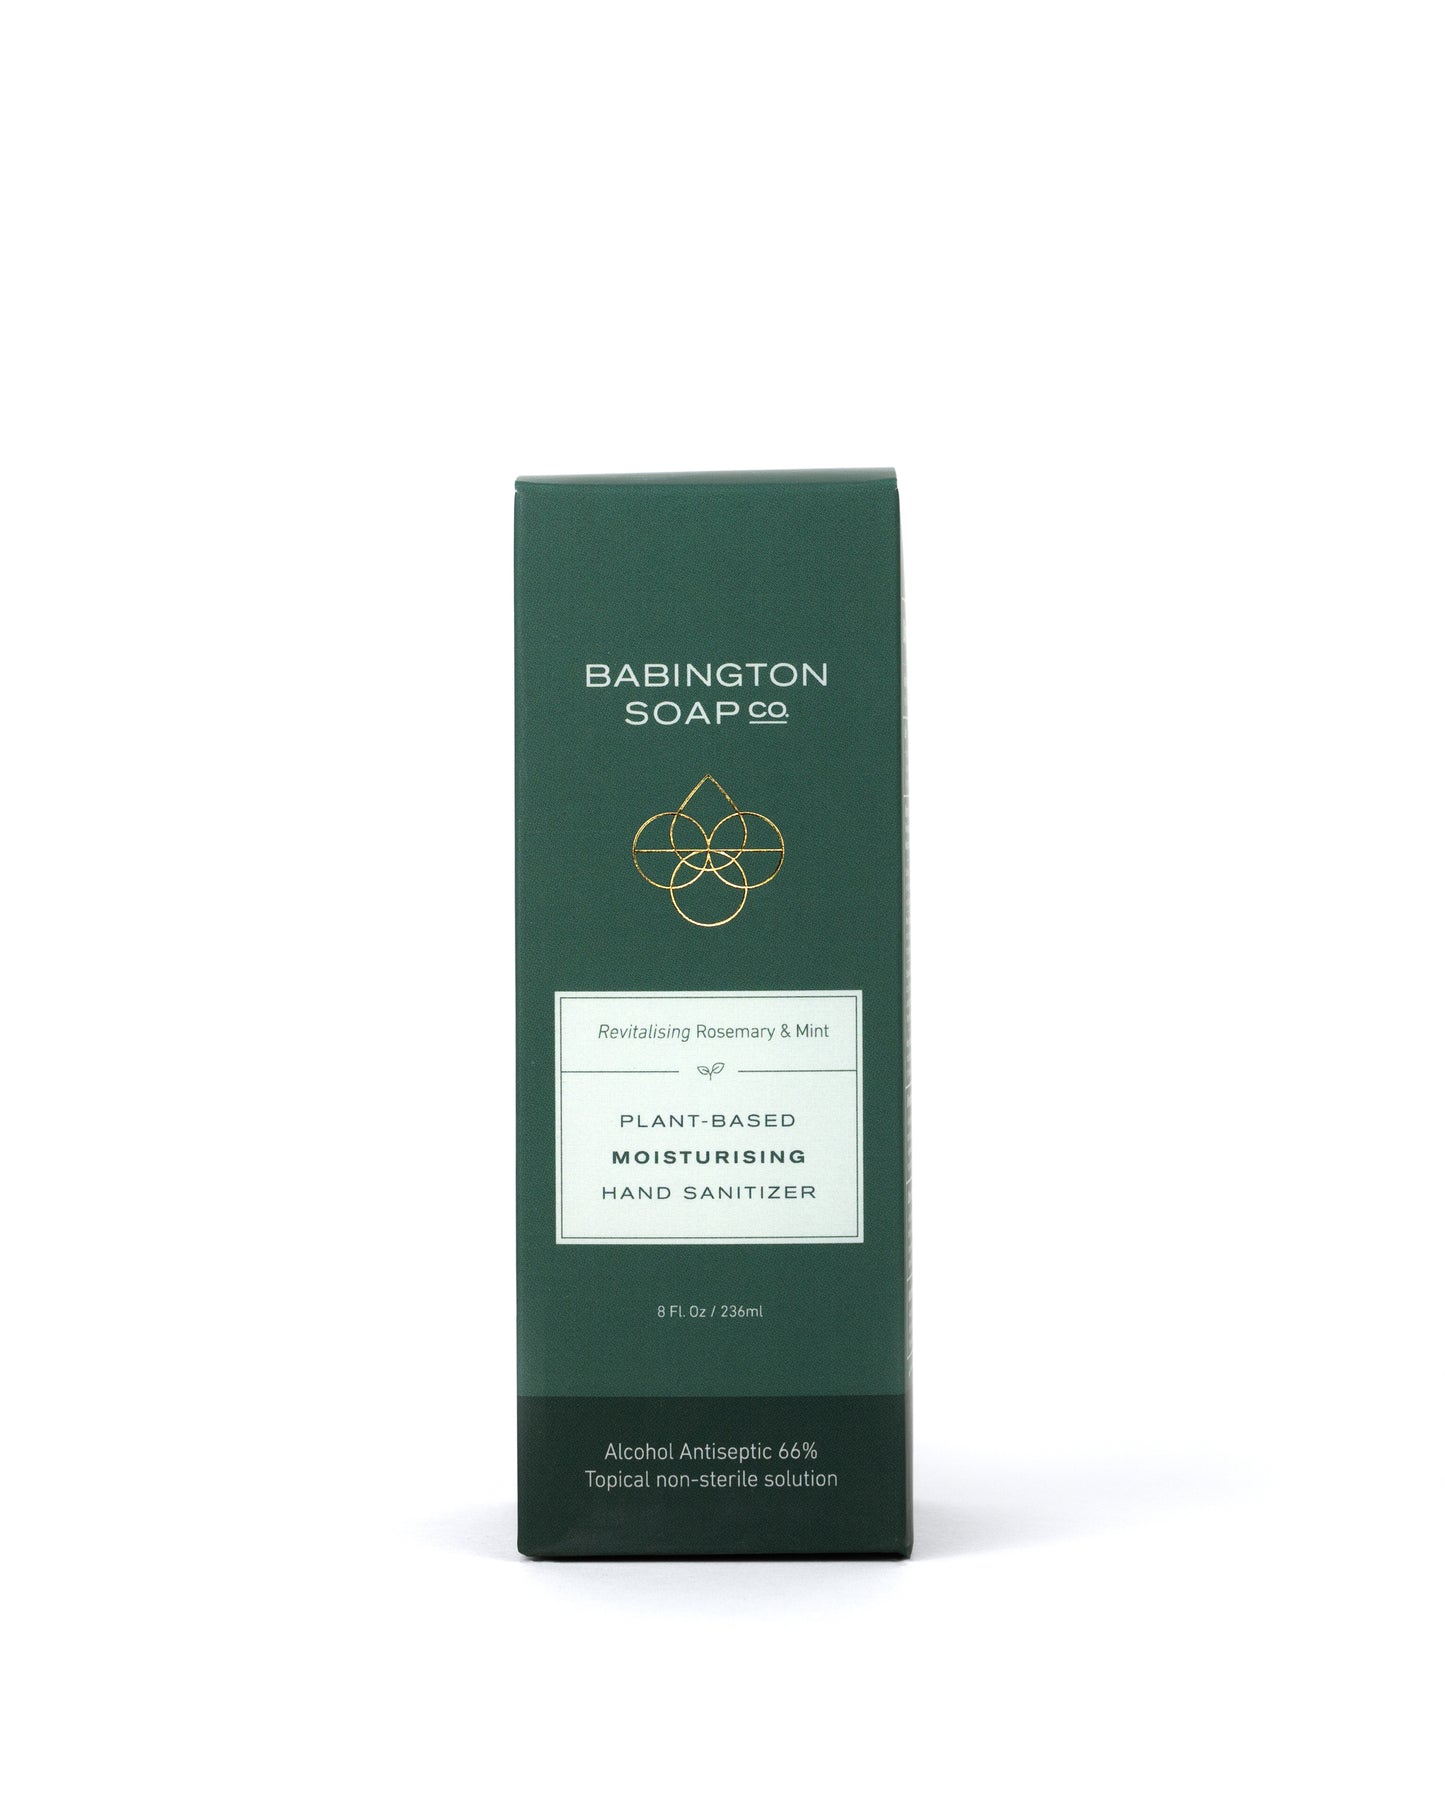 2-in-1 plant-based Moisturizer gel with an antibacterial - Revitalising Rosemary & Mint